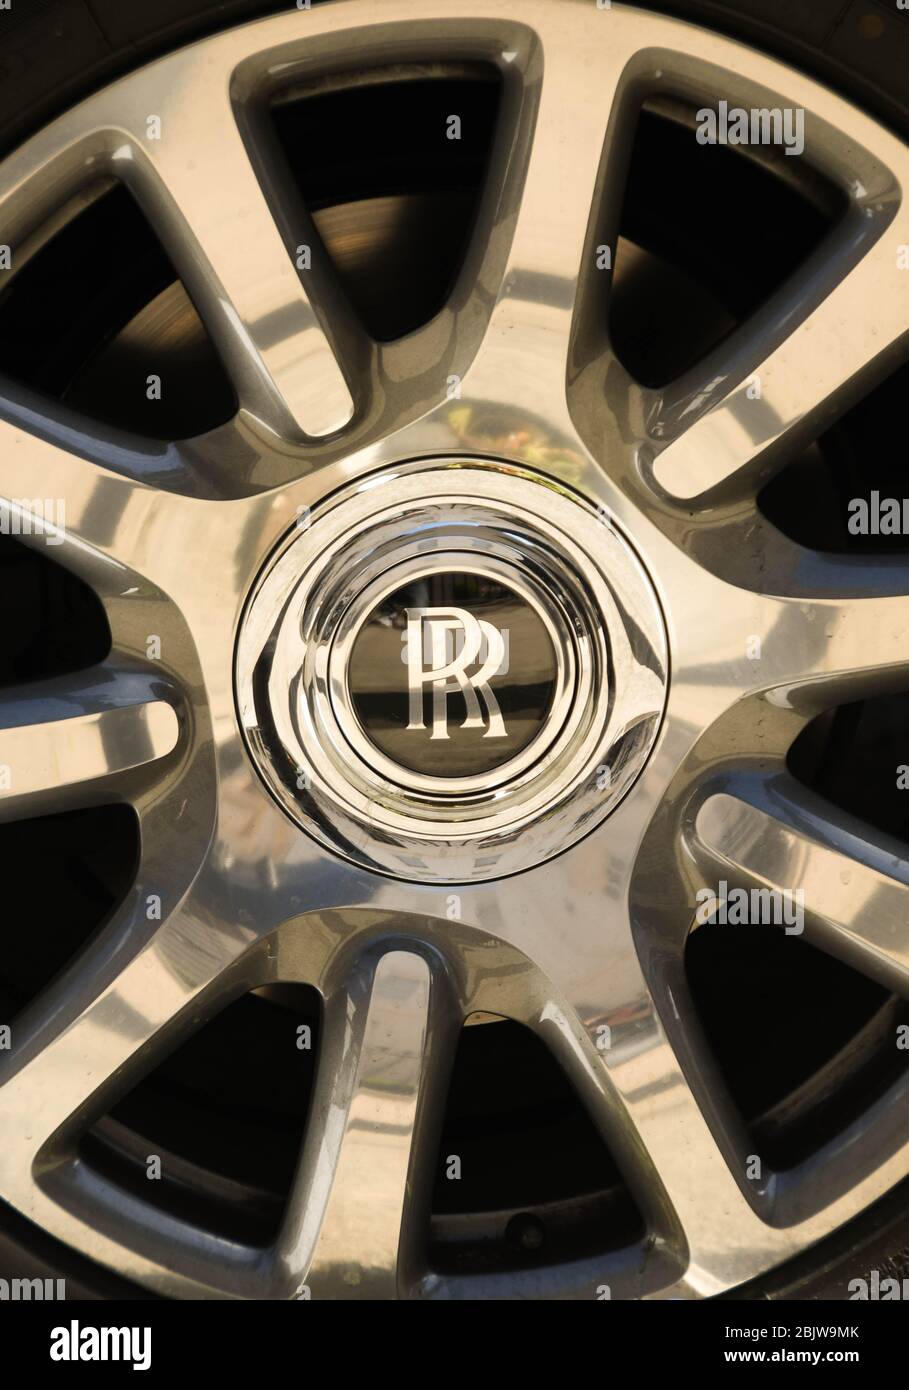 LONDON, ENGLAND - JULY 2018: Close up view of the wheel trim on a luxury Rolls Royce car Stock Photo